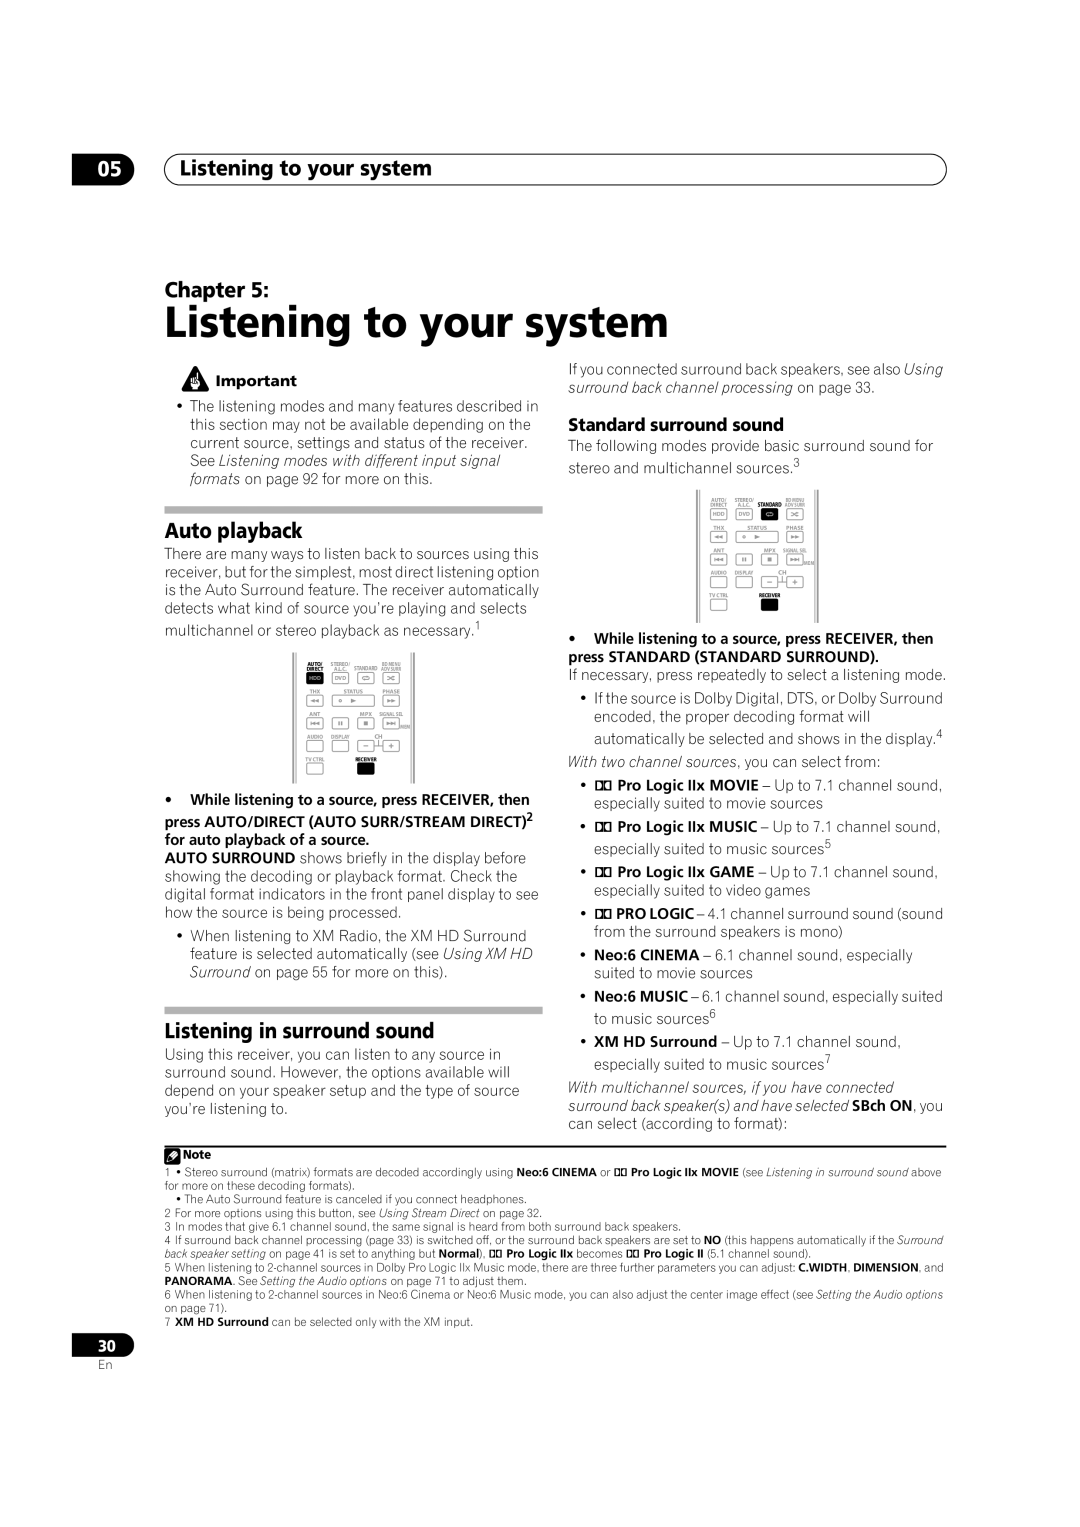 Pioneer VSX-1018AH-K 7 05Listening to your system Chapter, Auto playback, Listening in surround sound 